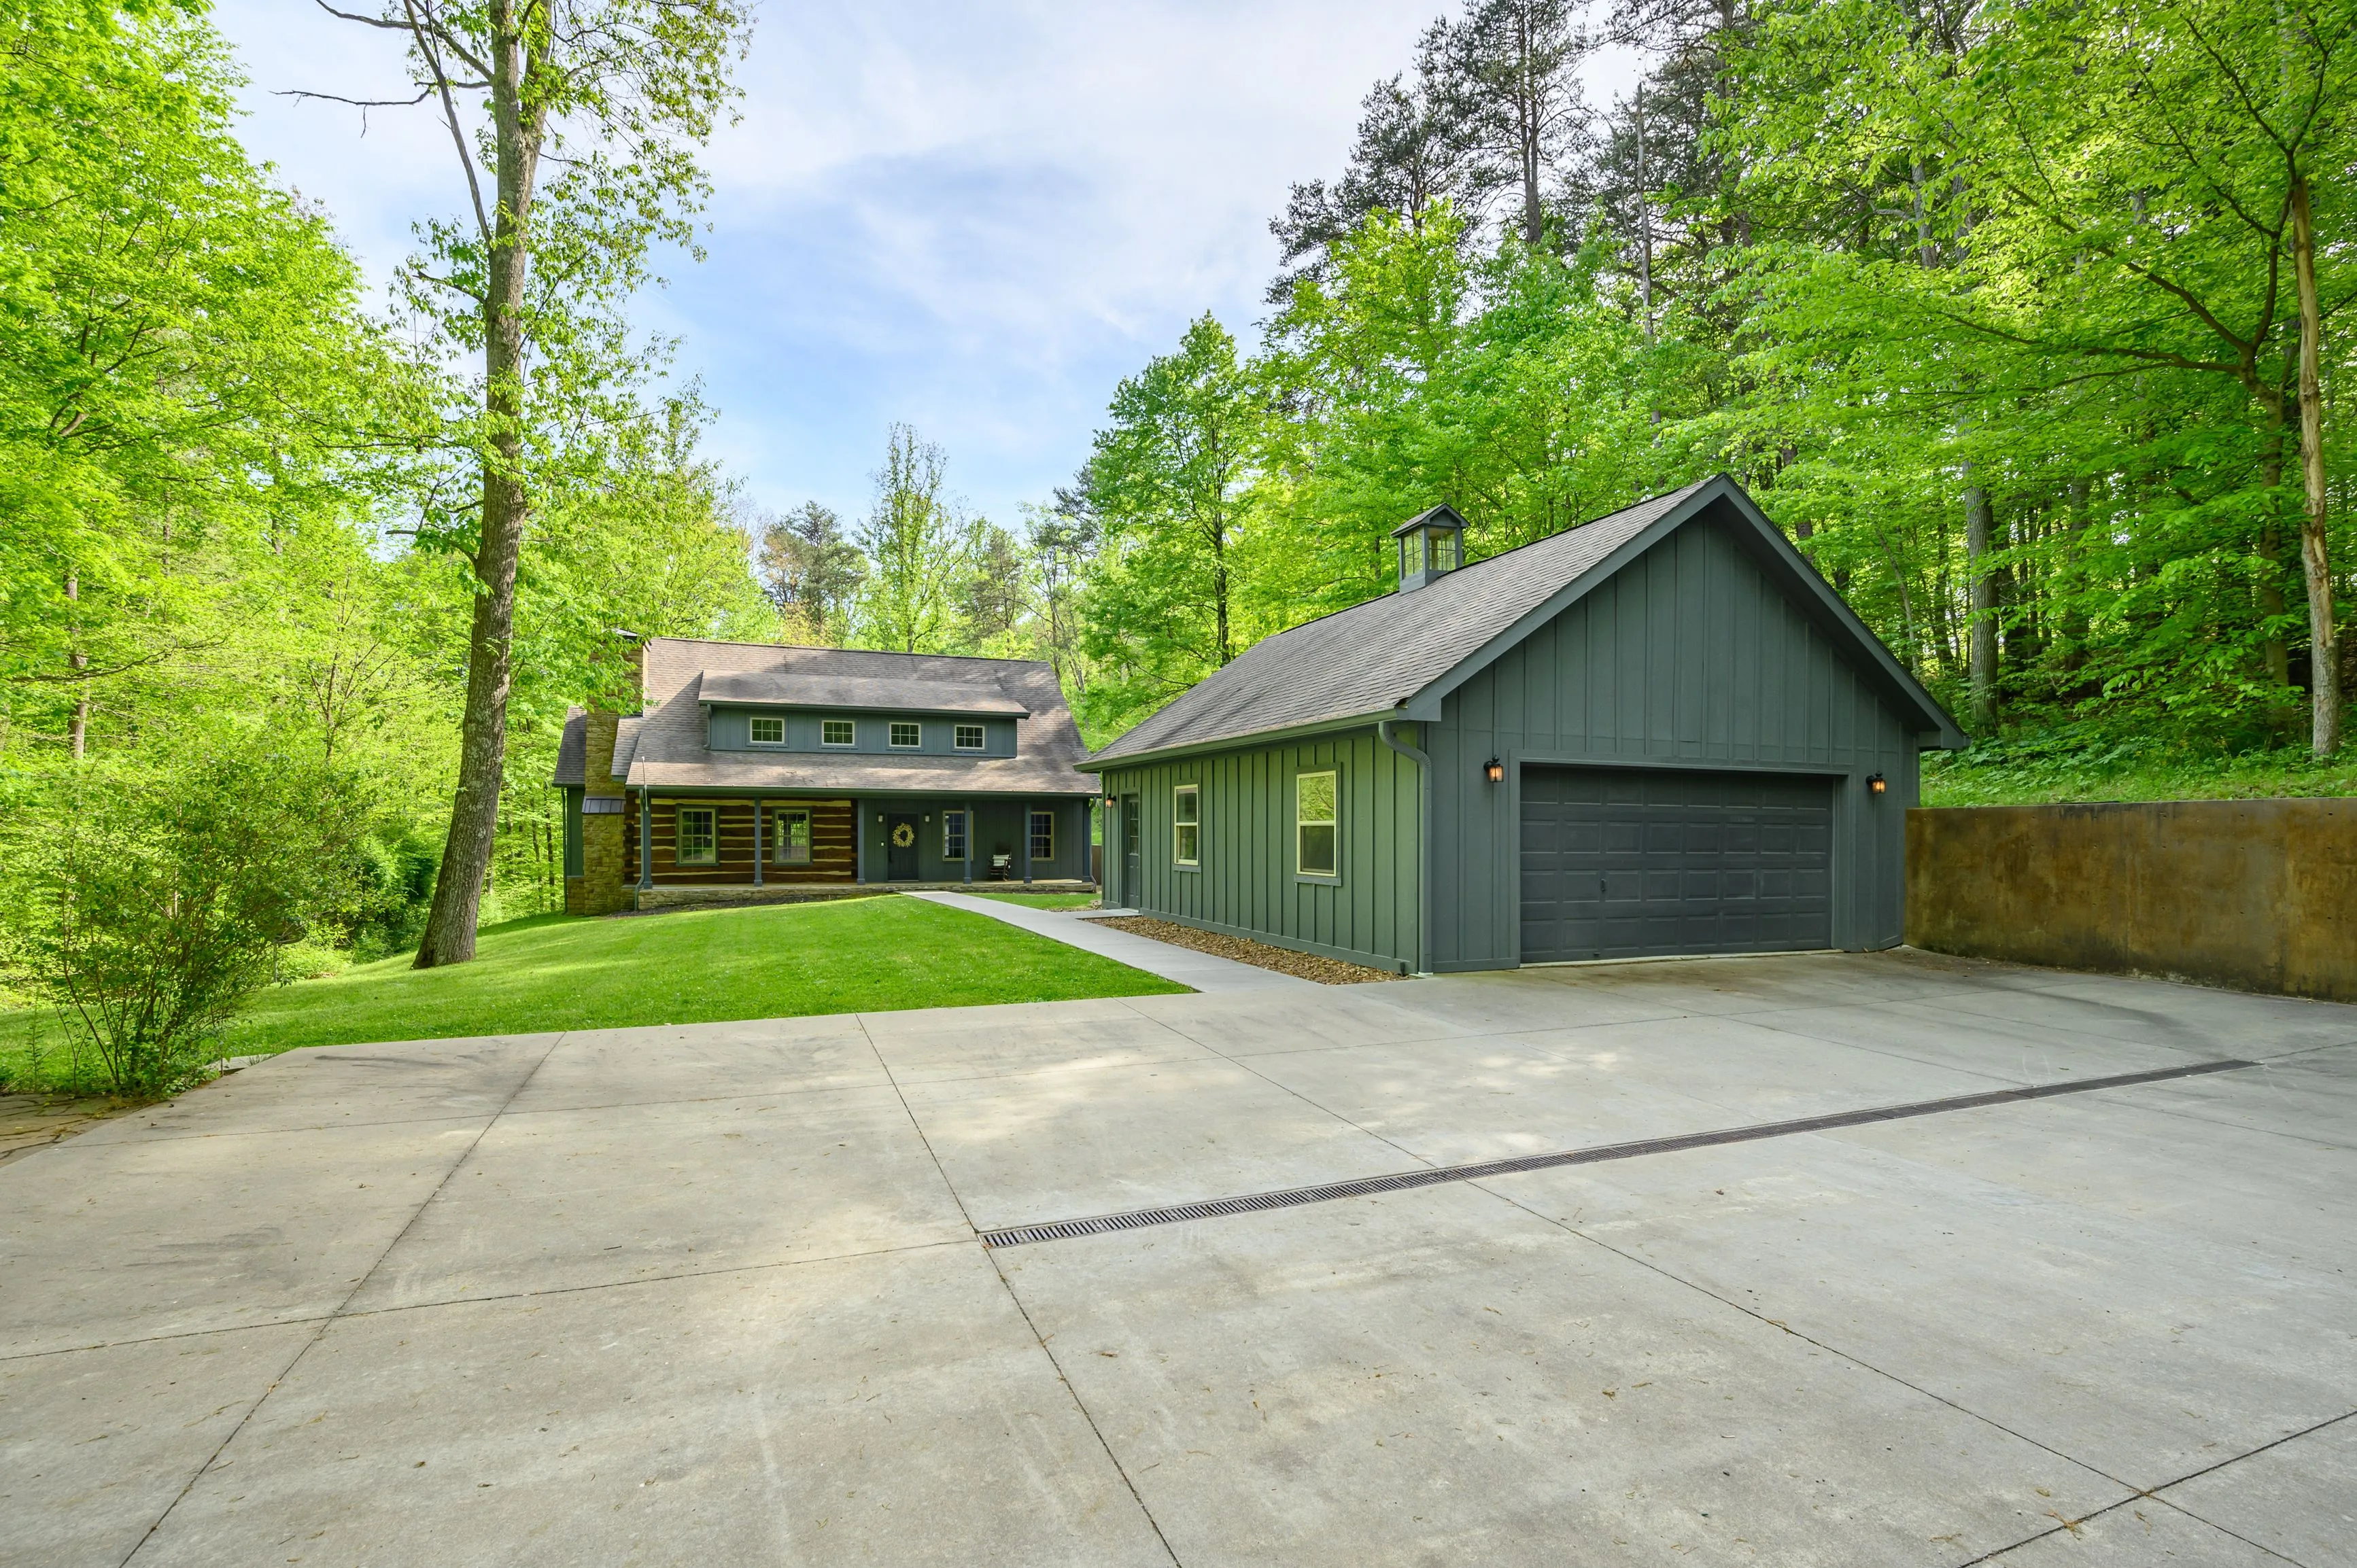 A modern two-story house with a gray exterior and attached garage surrounded by lush green trees with a concrete driveway in the foreground.